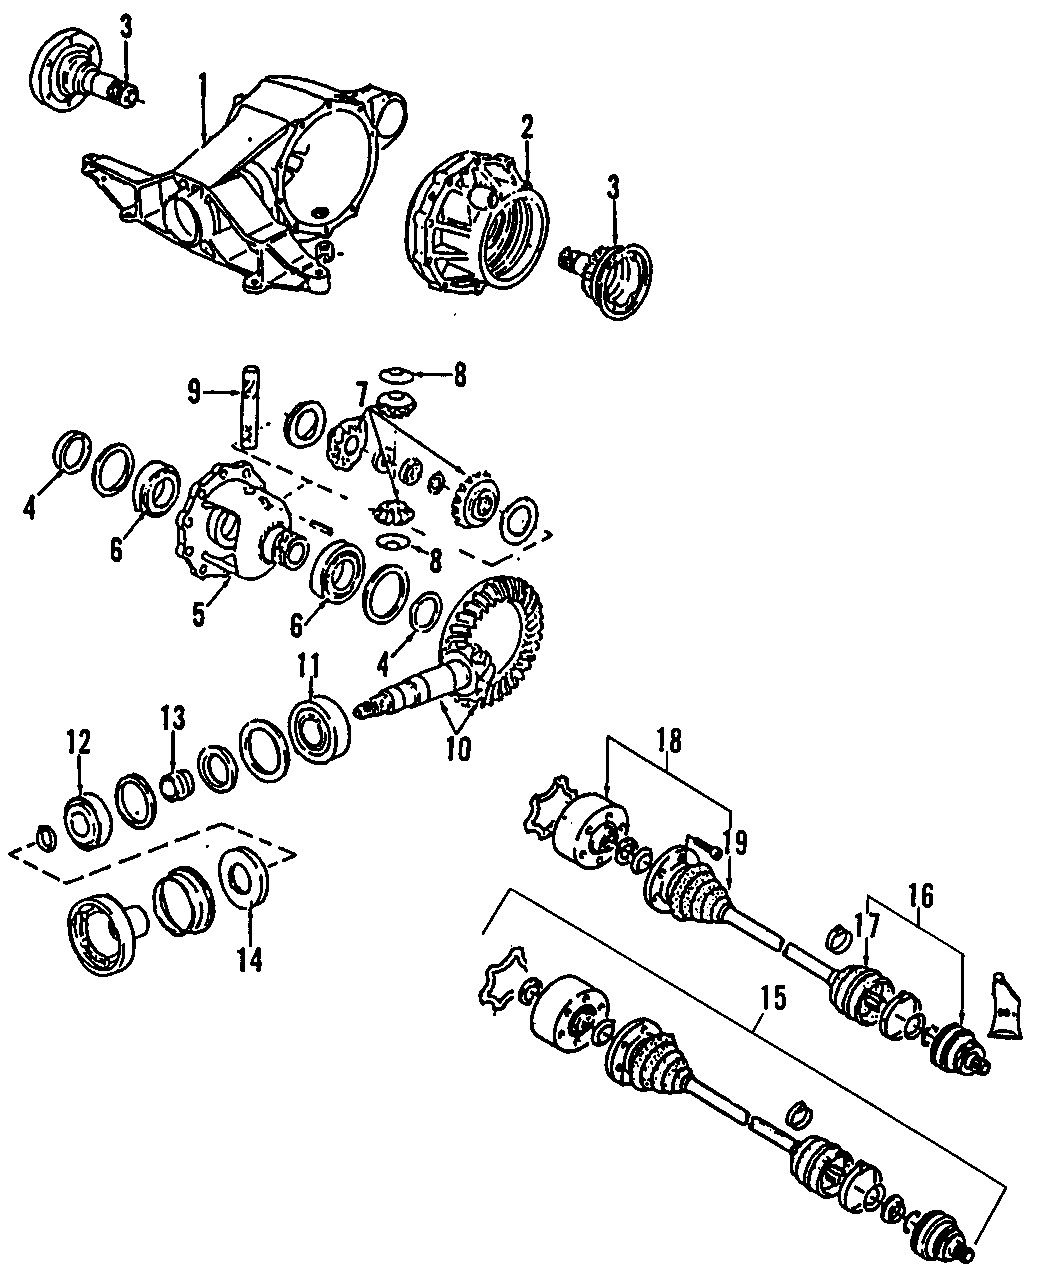 6DRIVE AXLES. REAR AXLE. AXLE SHAFTS & JOINTS. DIFFERENTIAL. PROPELLER SHAFT.https://images.simplepart.com/images/parts/motor/fullsize/F205080.png